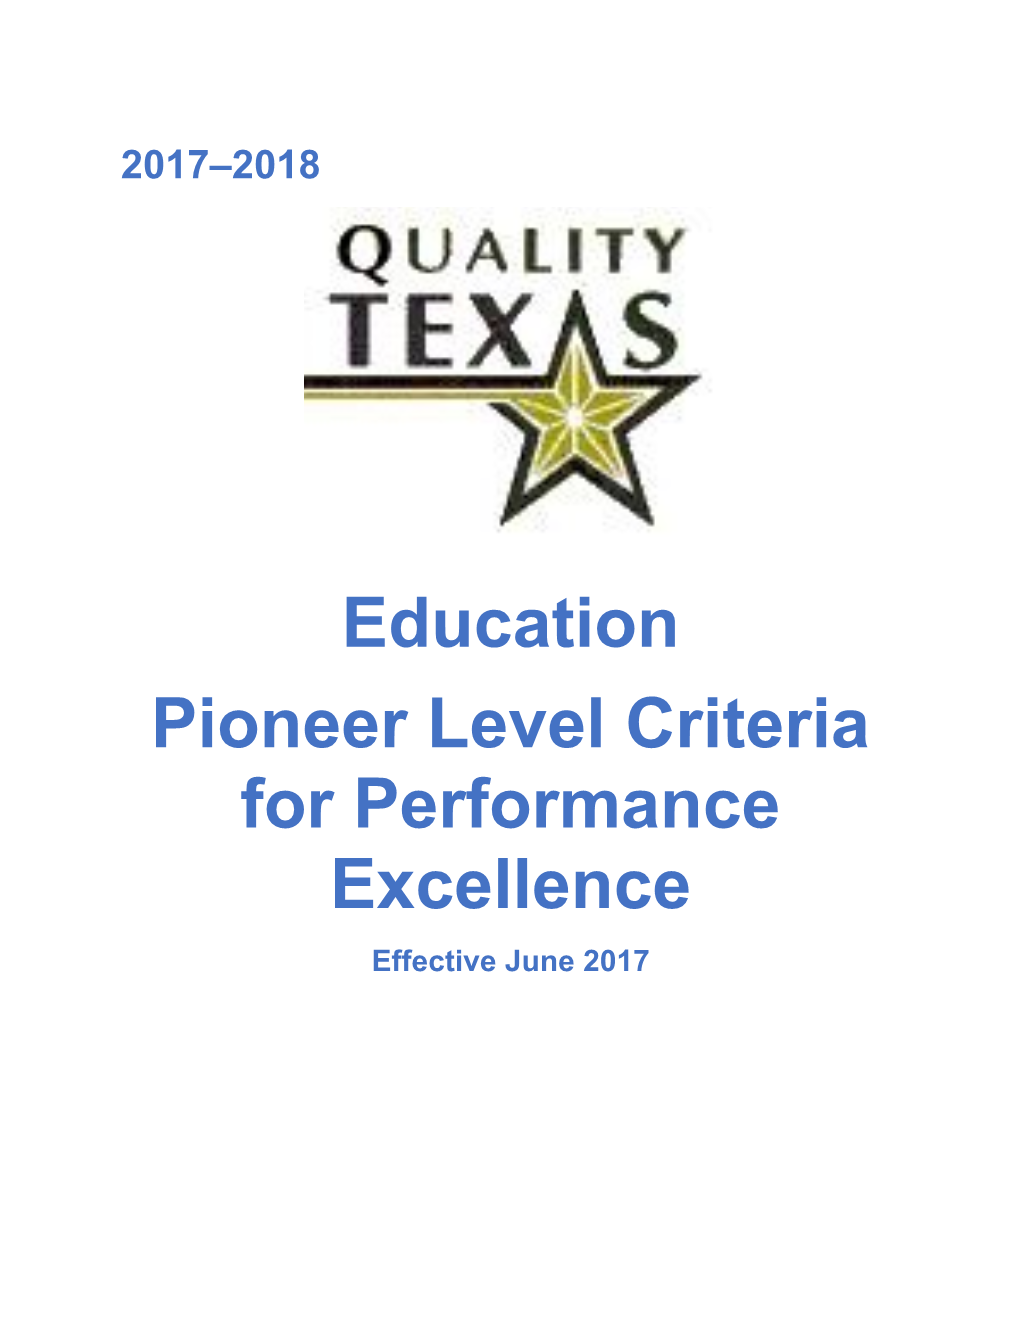 Pioneer Level Criteria for Performance Excellence